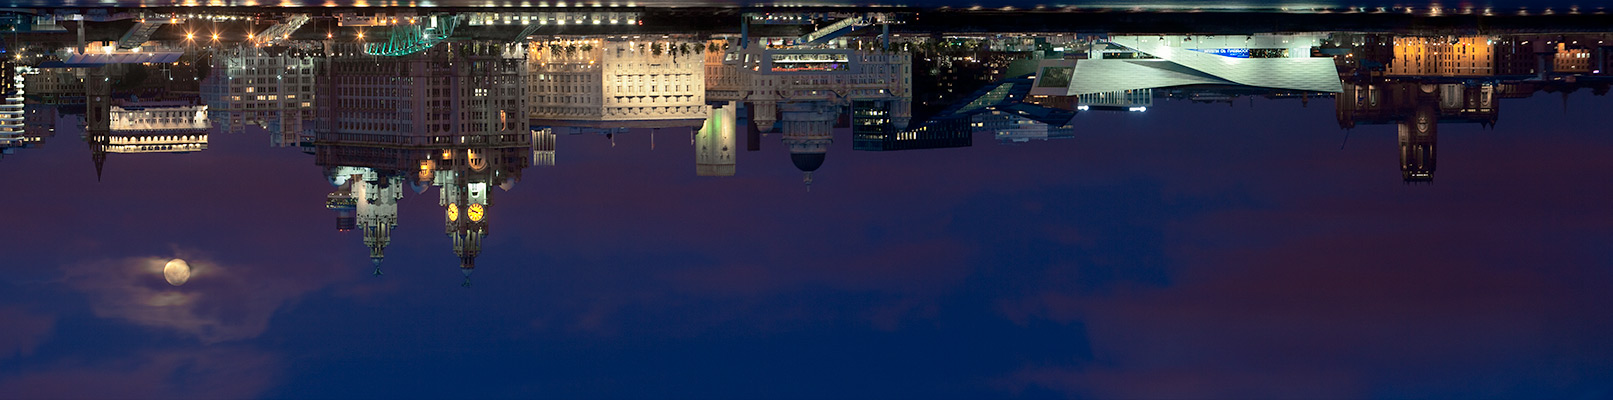 Liverpool Night and Day. Fine Art Landscape Photography by Gary Waidson  All rights reserved